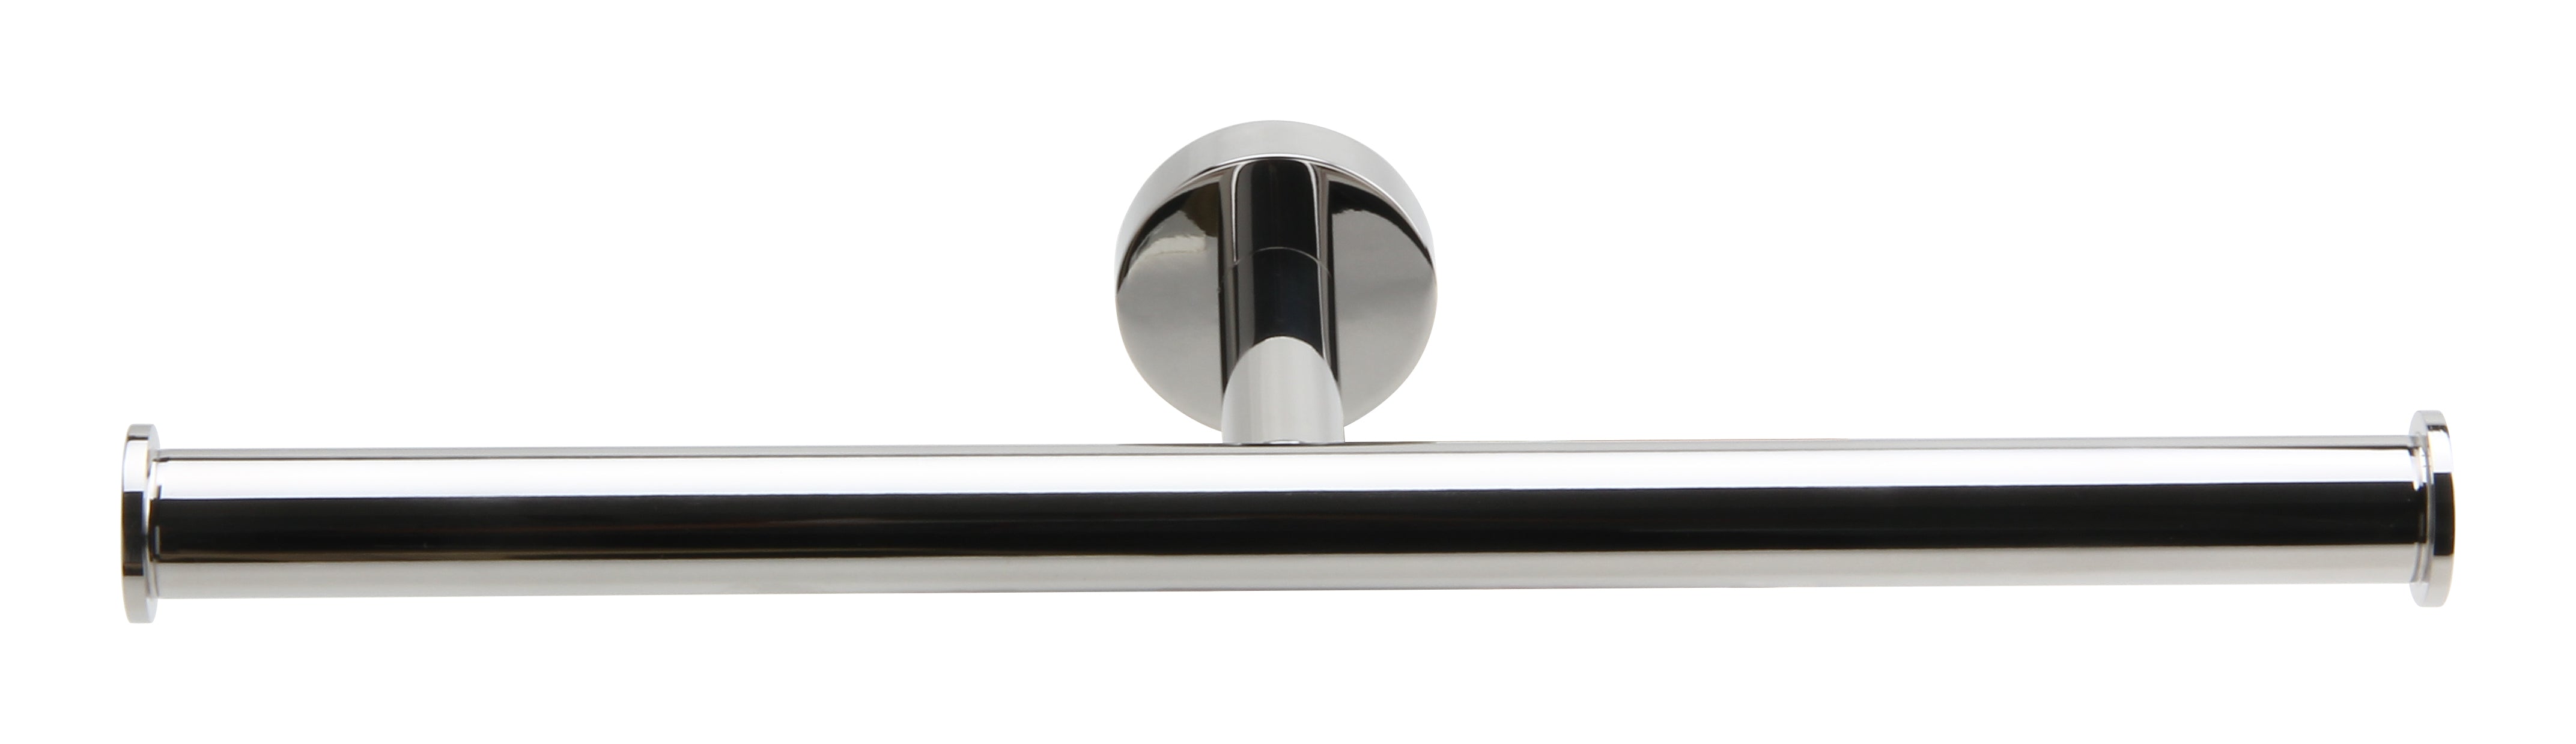 Silverline Double Roll Toilet Paper Holder Polished Chrome Wall Mounted